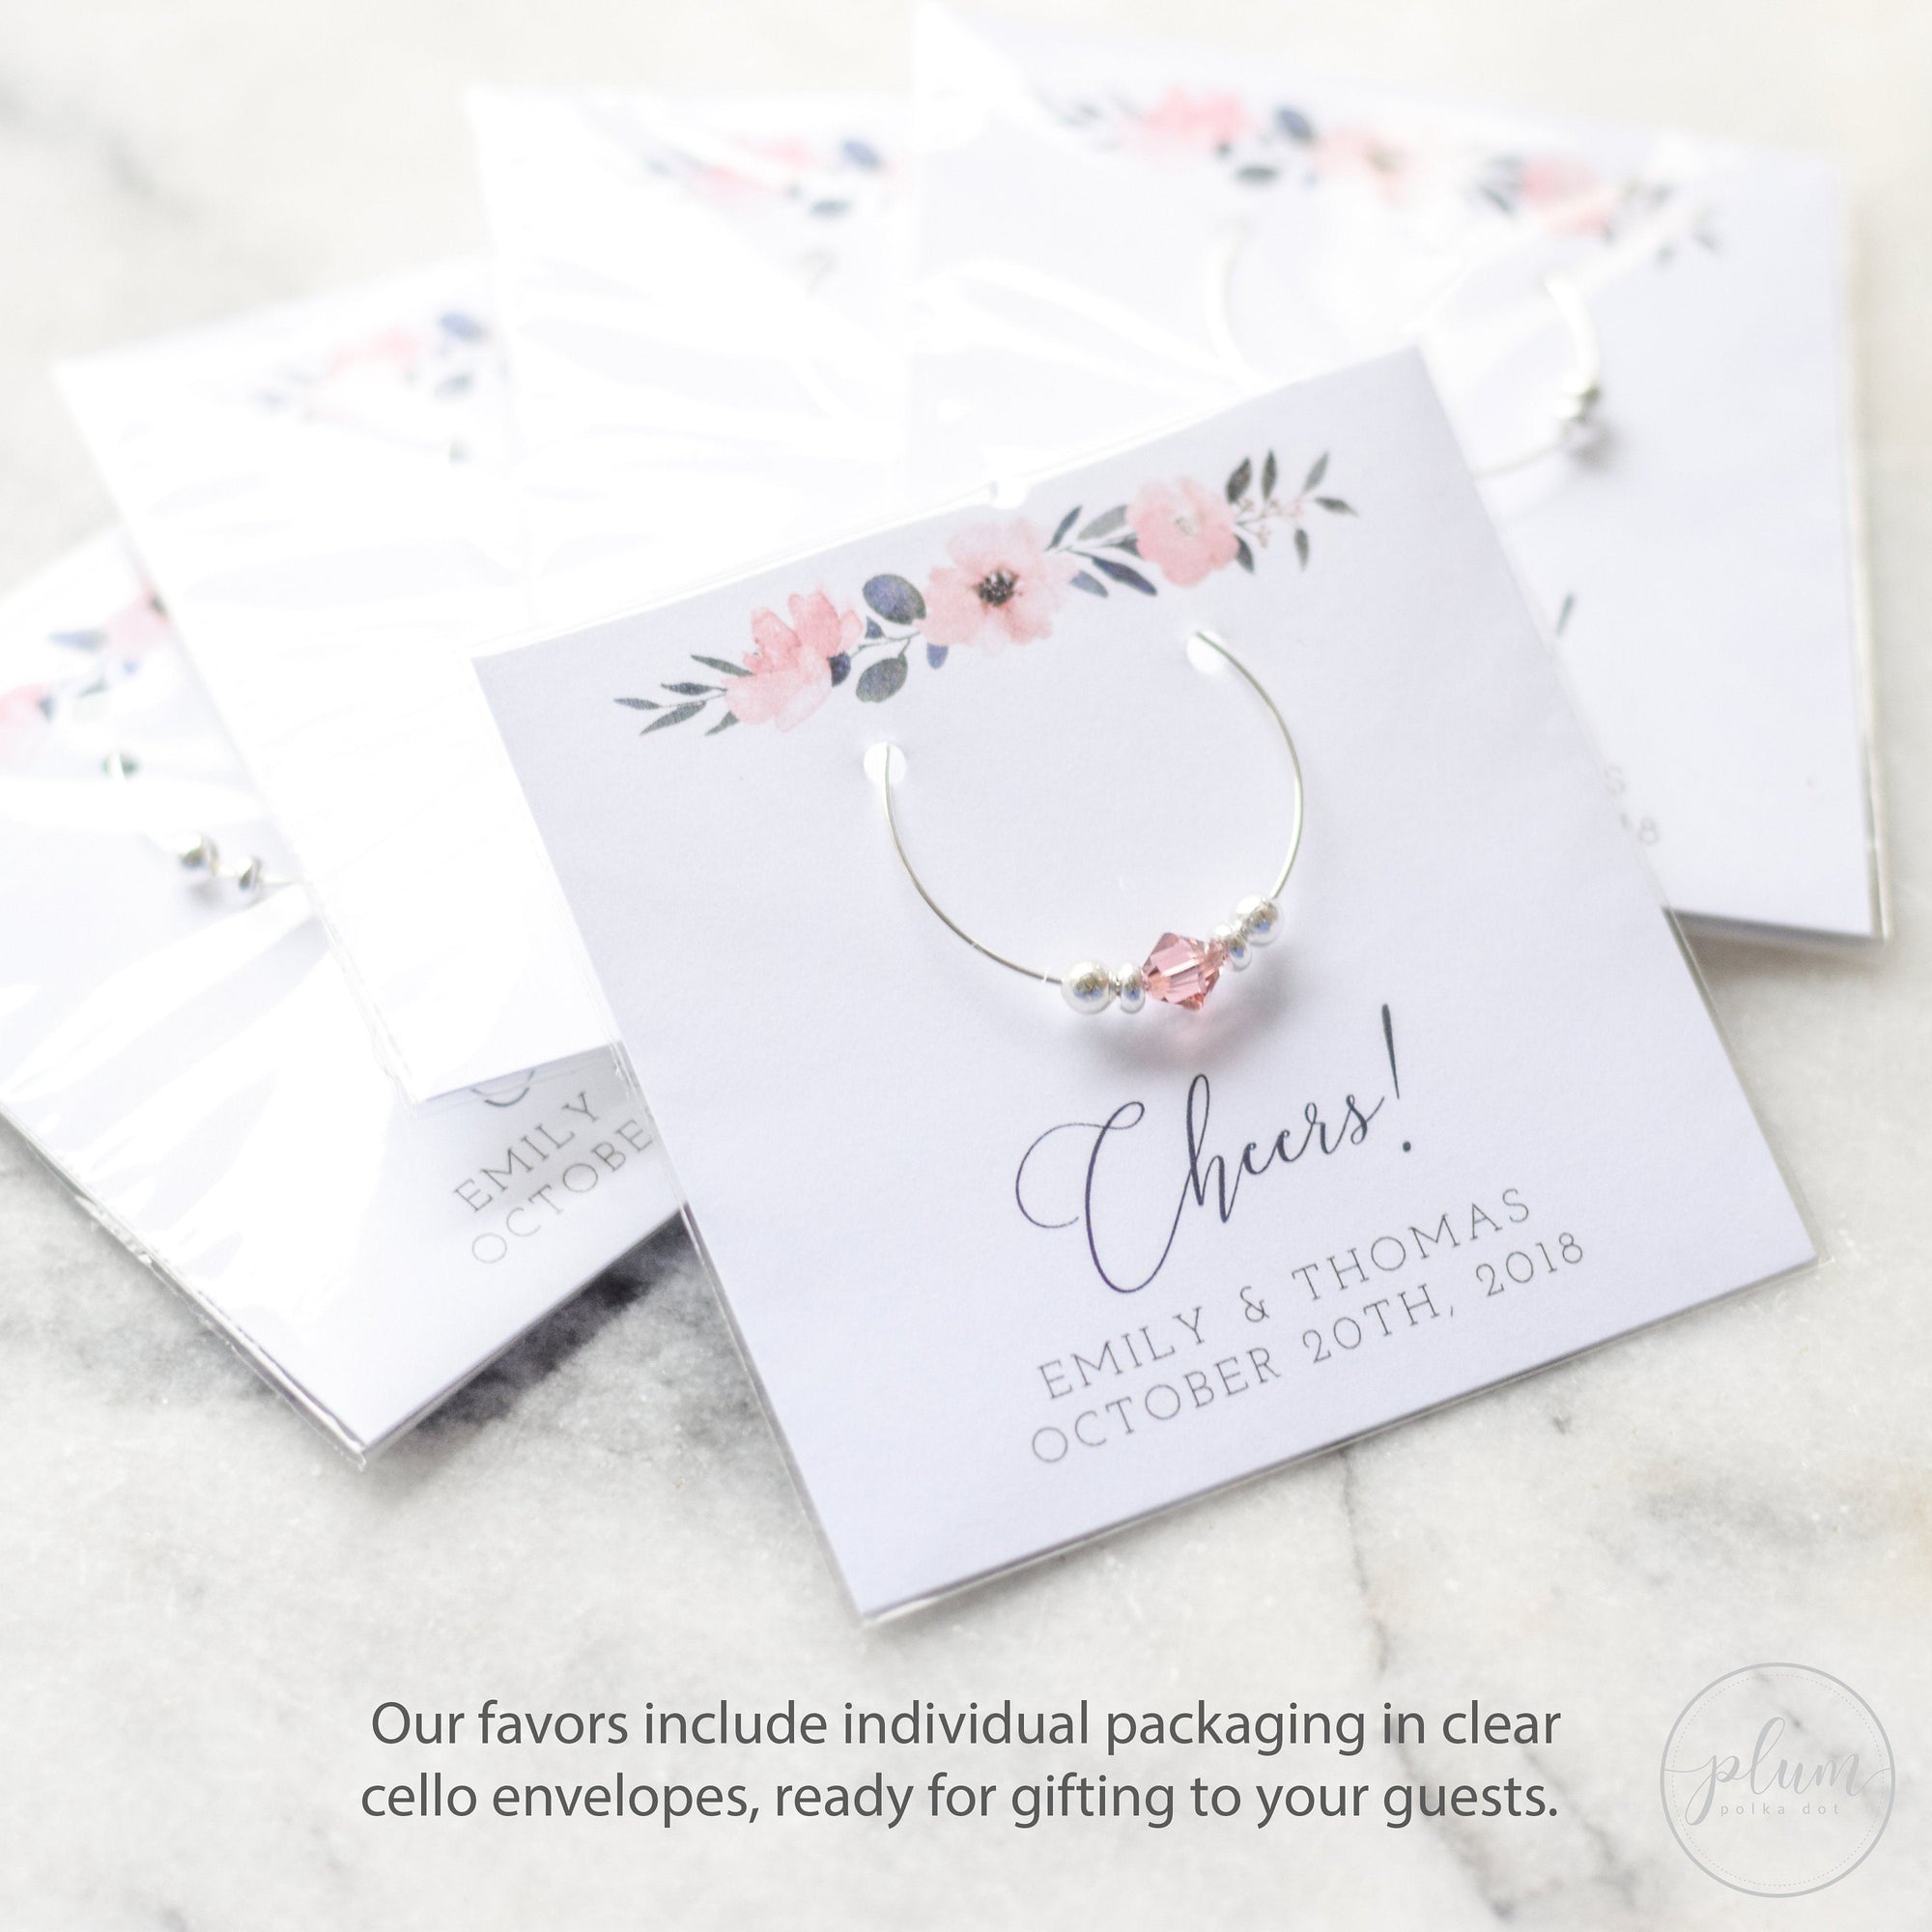 Blush Engagement Party Favors, Swarovski Crystal Wine Charms